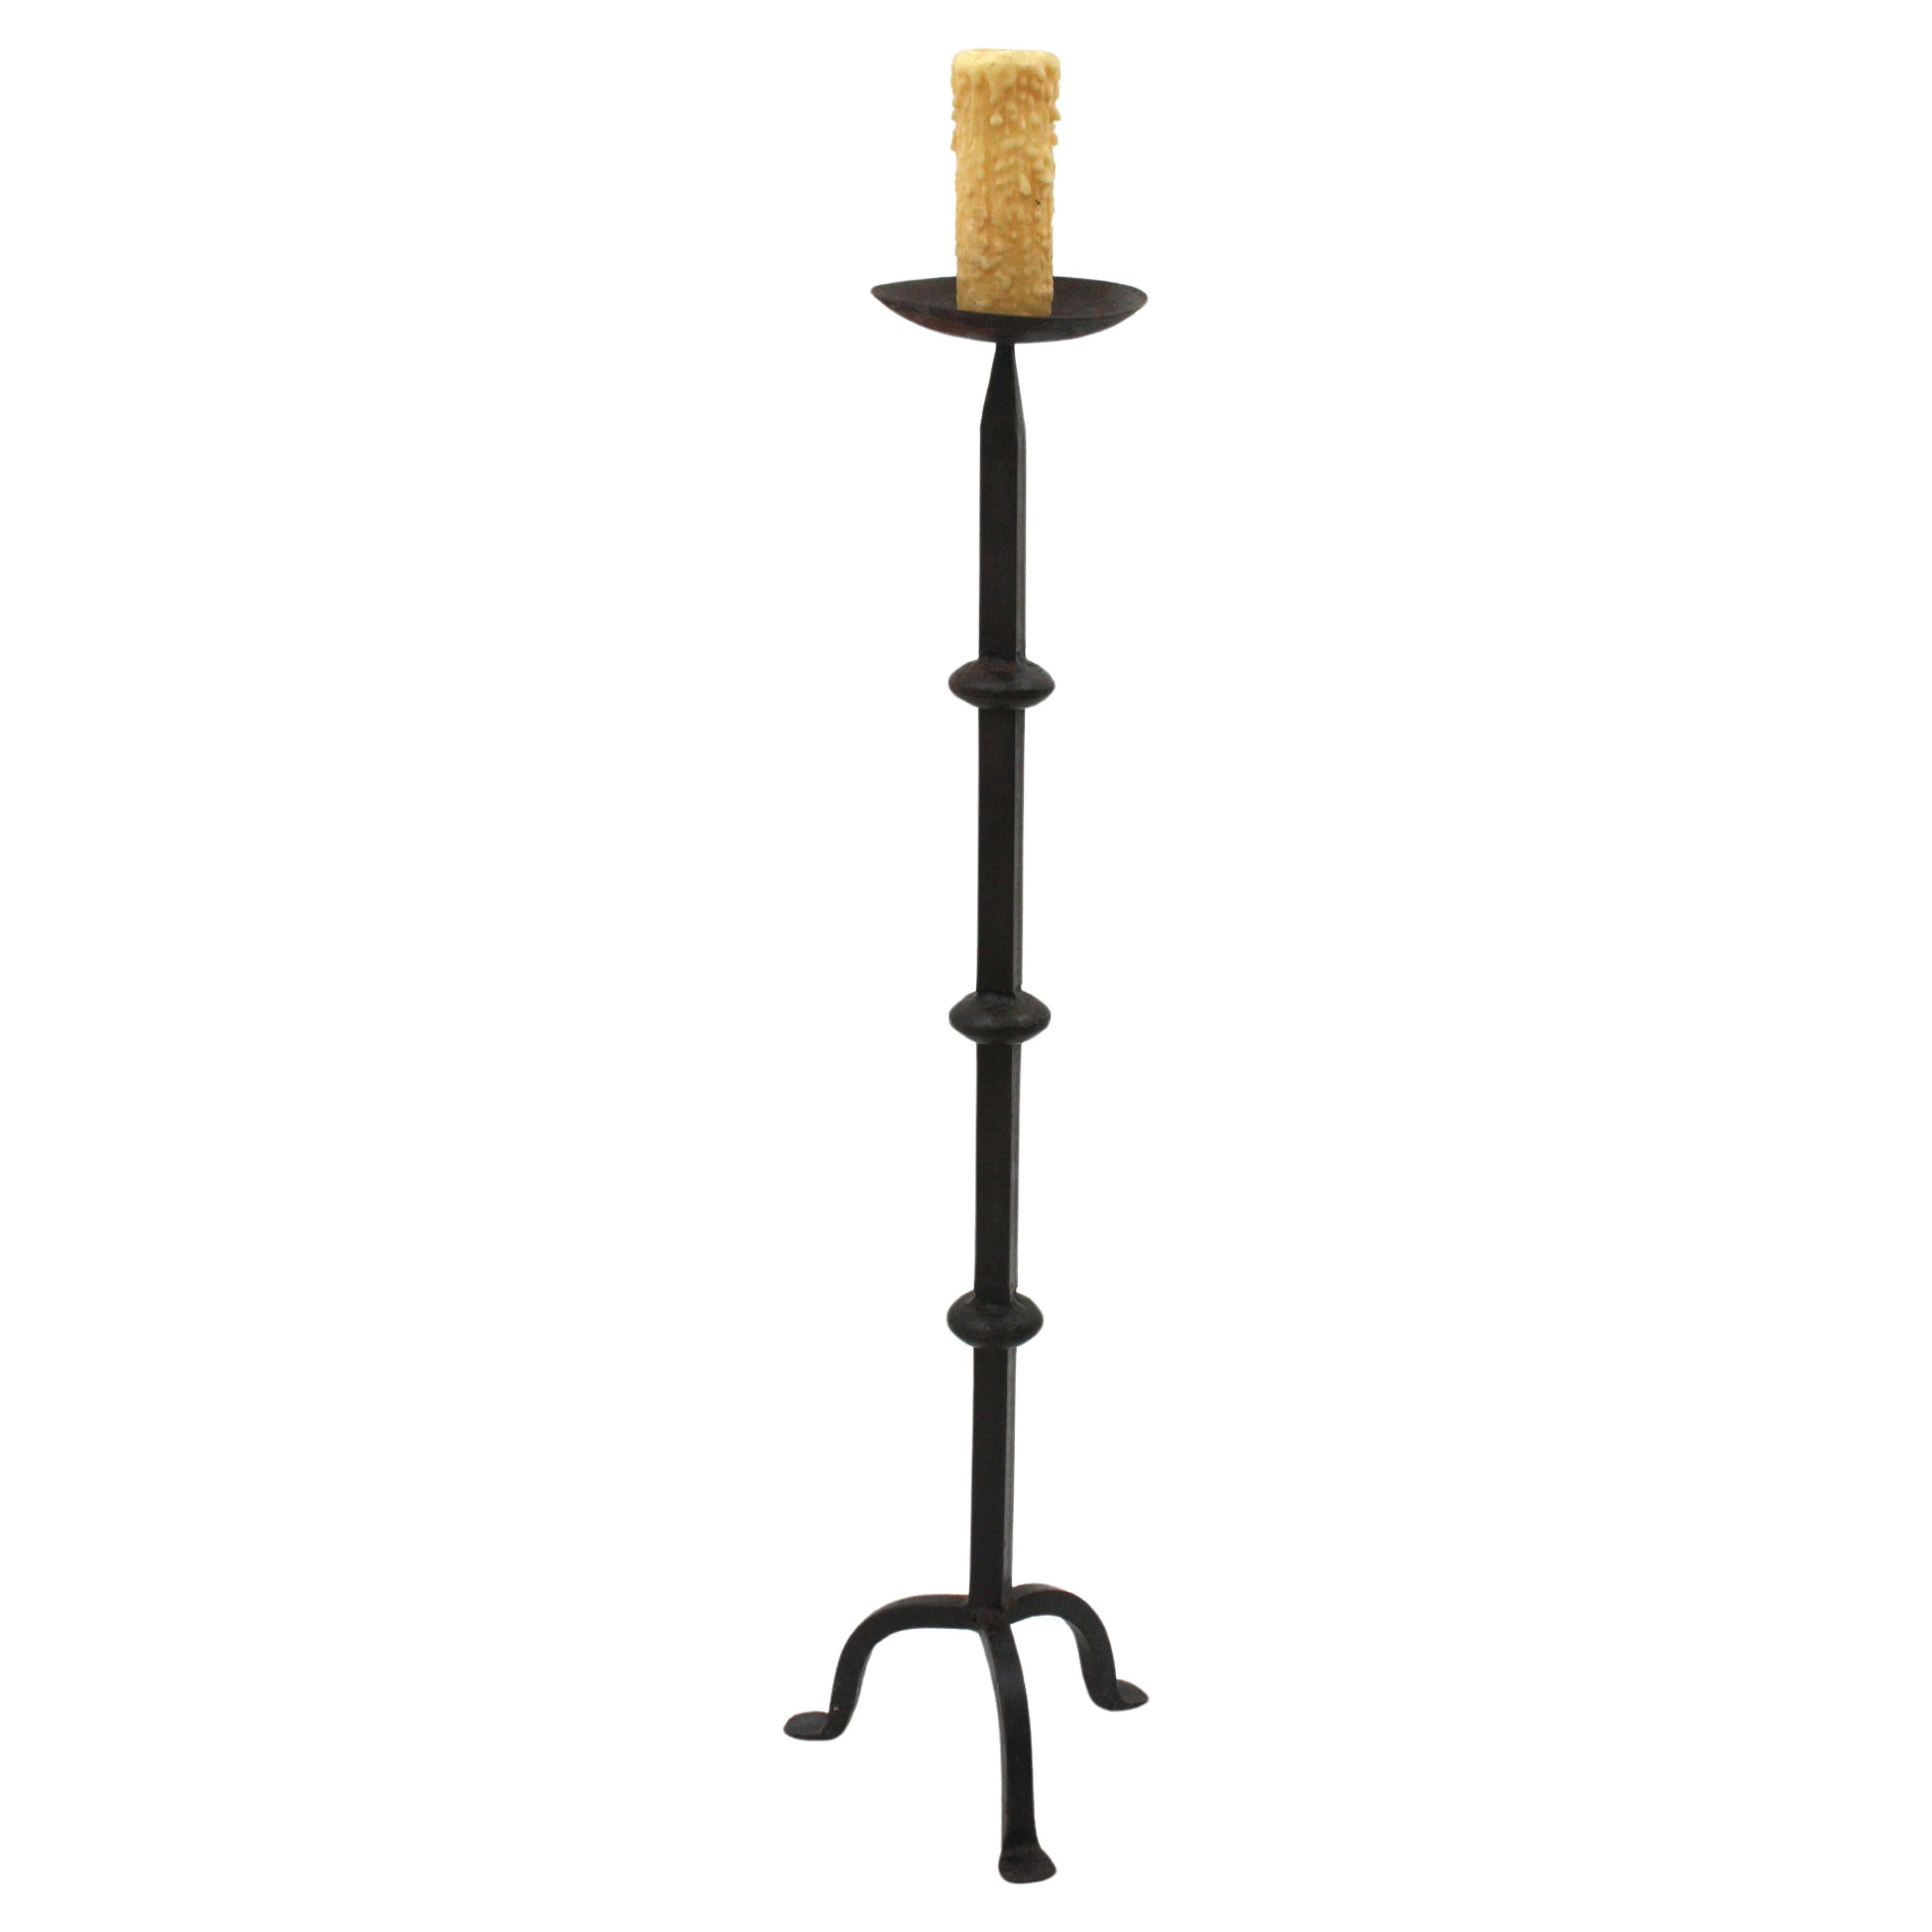 Gorgeous handwrought torchère candle holder, Spain, 1940s
This medieval style floor candleholder stands up on three legs tripod base. It has a terrific aged patina. It has a clean design inspired in Gothic style, with ring decorations at the central